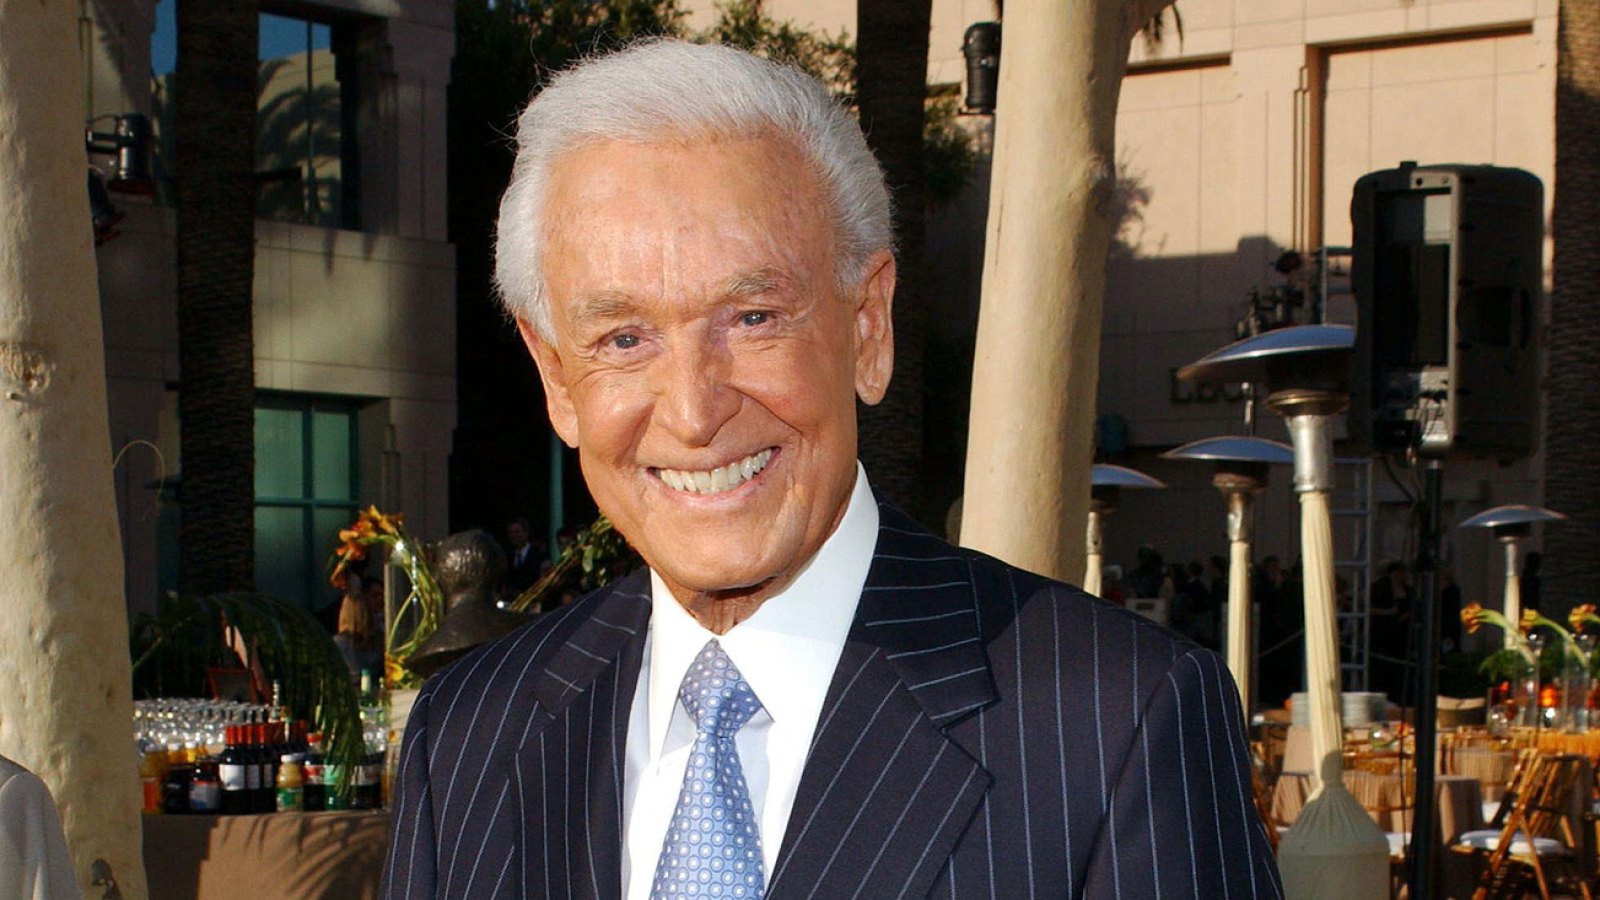 Bob Barker Returns to The Price Is Right for 90th Birthday